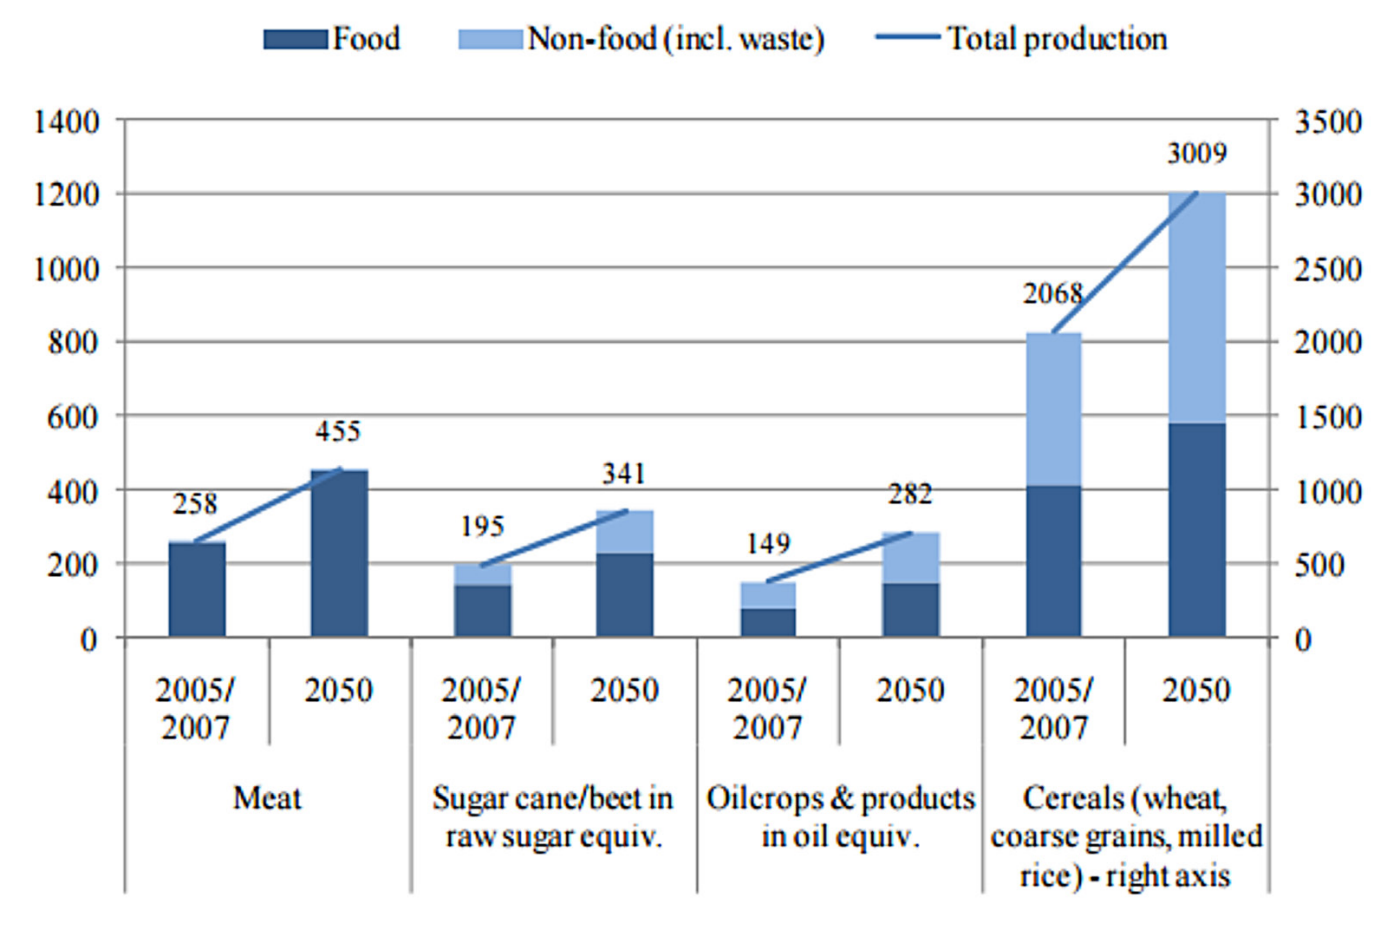 Figure 10: Projections of levels of agricultural commodity production in 2050 compared to 2005/2007 levels. 